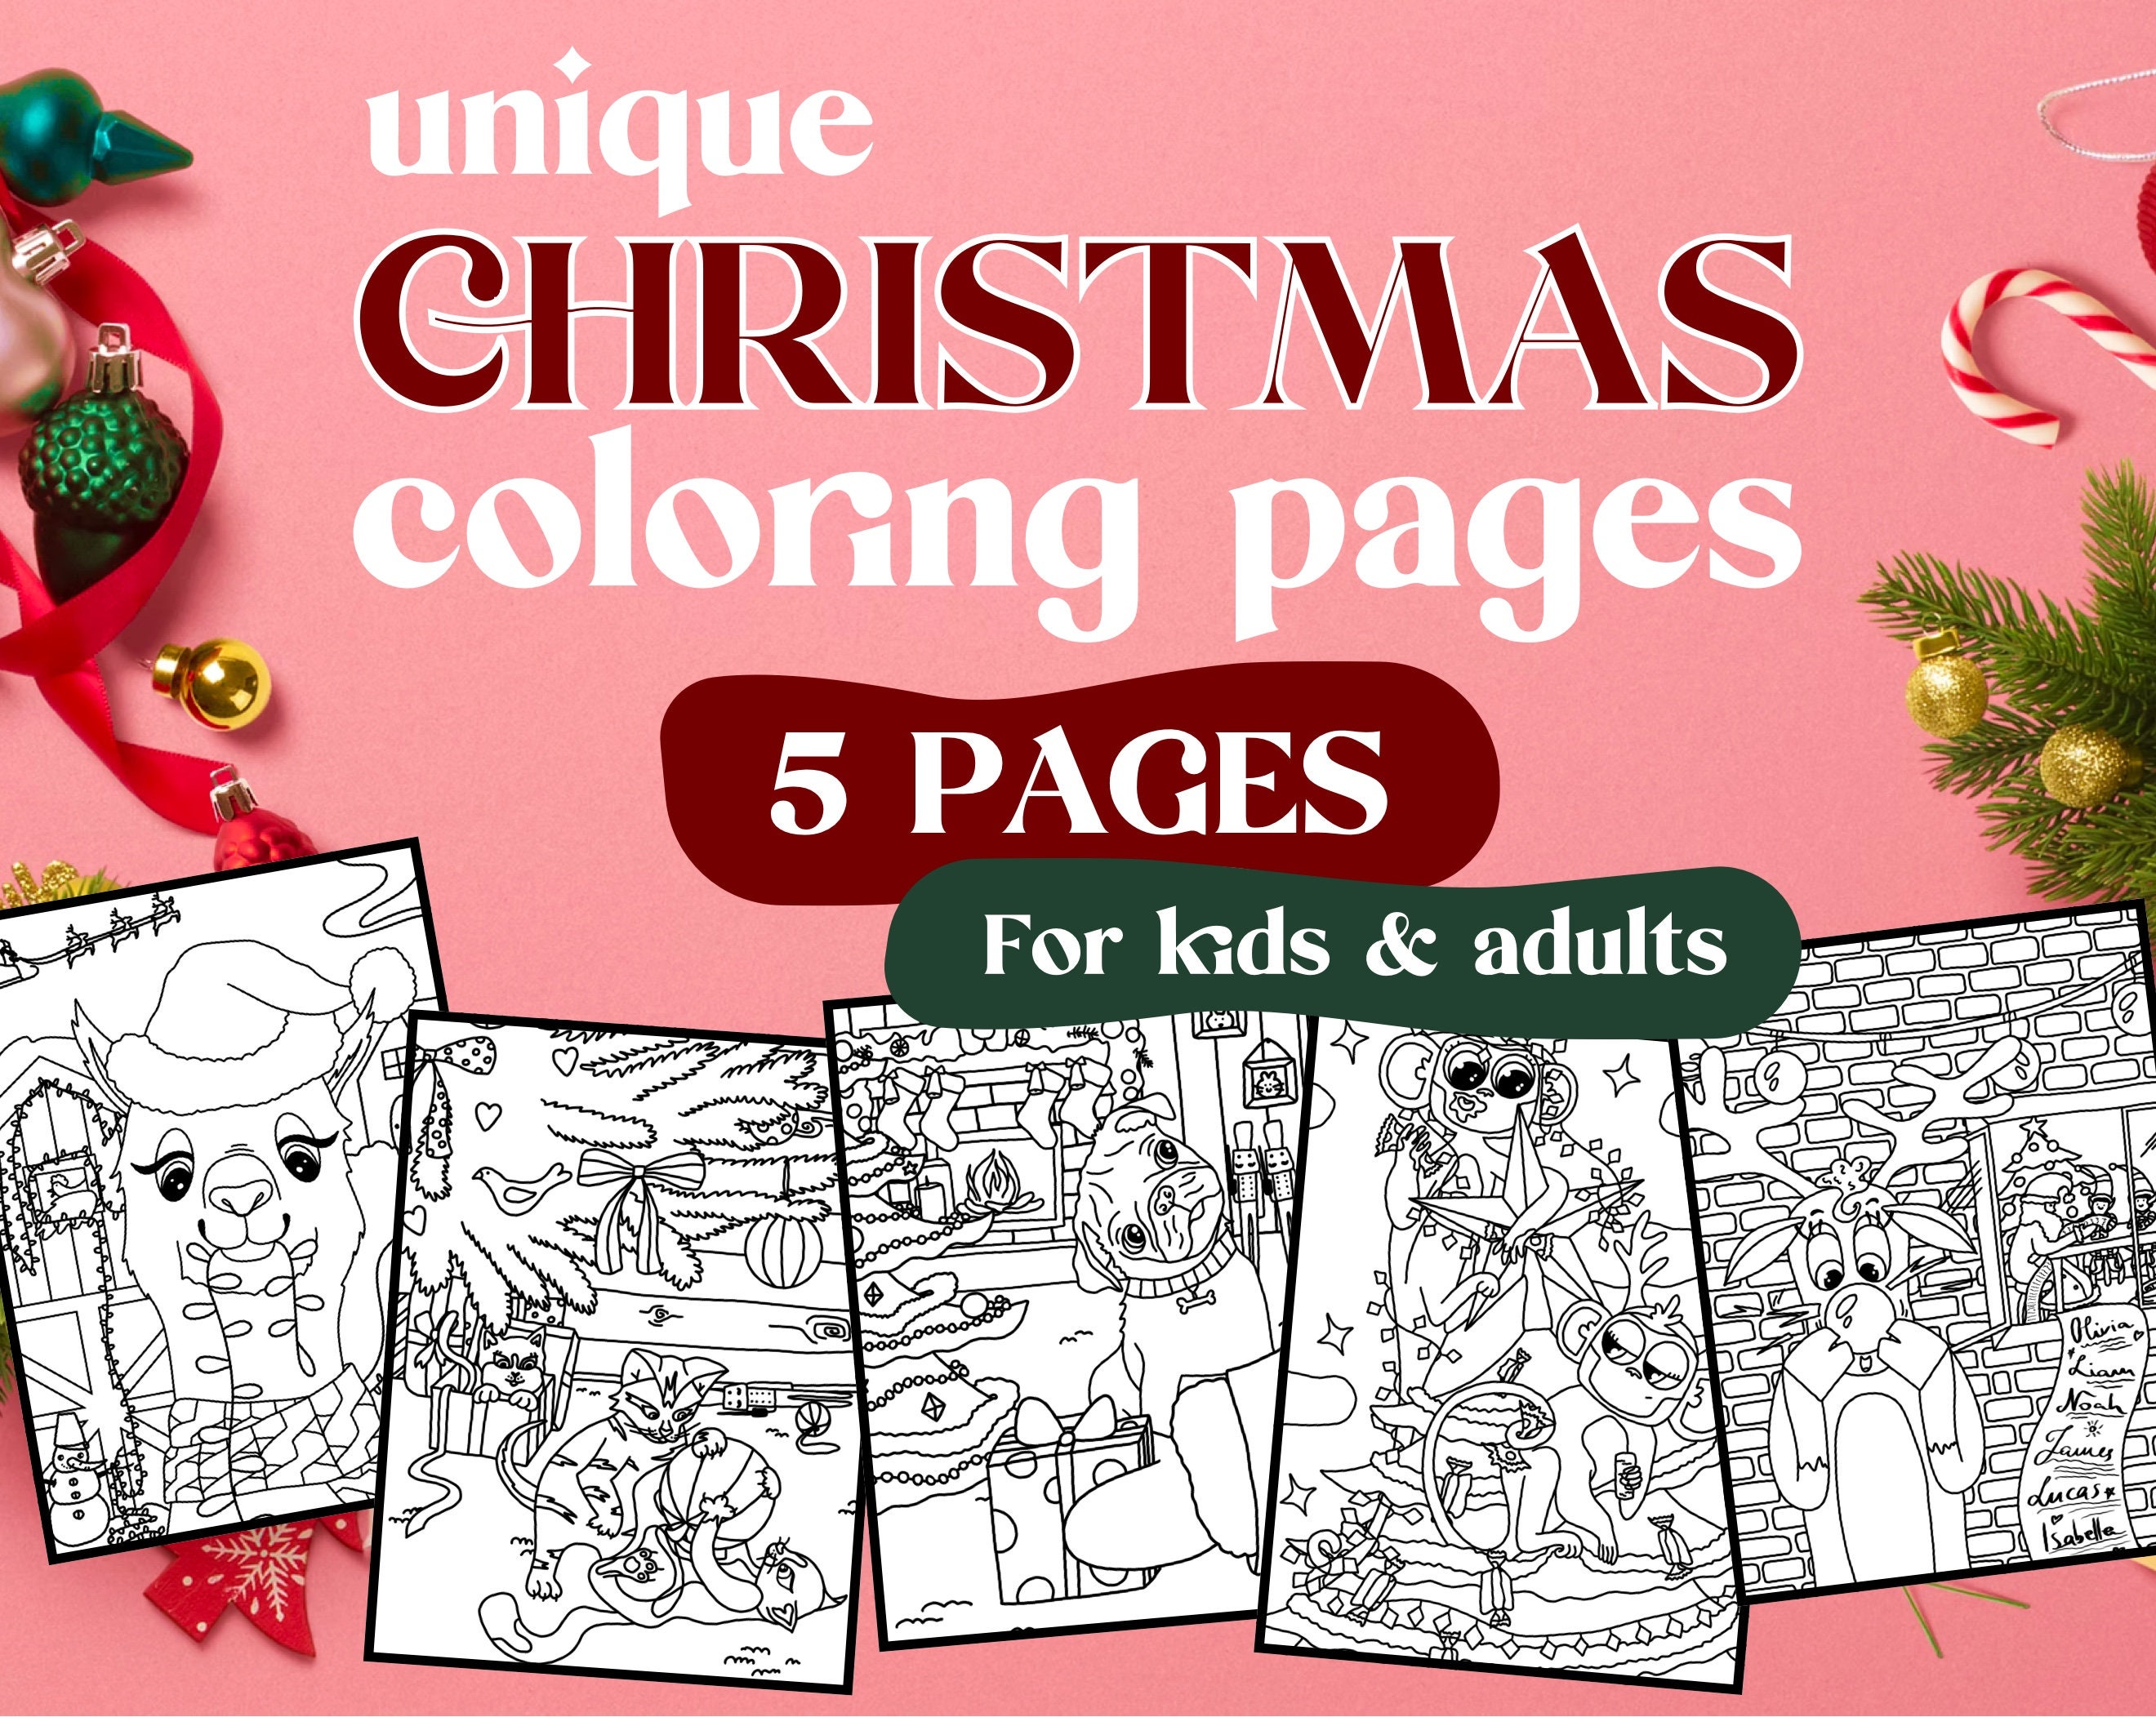 Christmas Coloring Pages for Kids and Adults Downloadable Unique Coloring  Pages Relaxing Winter Coloring Book Sustainable Gift 